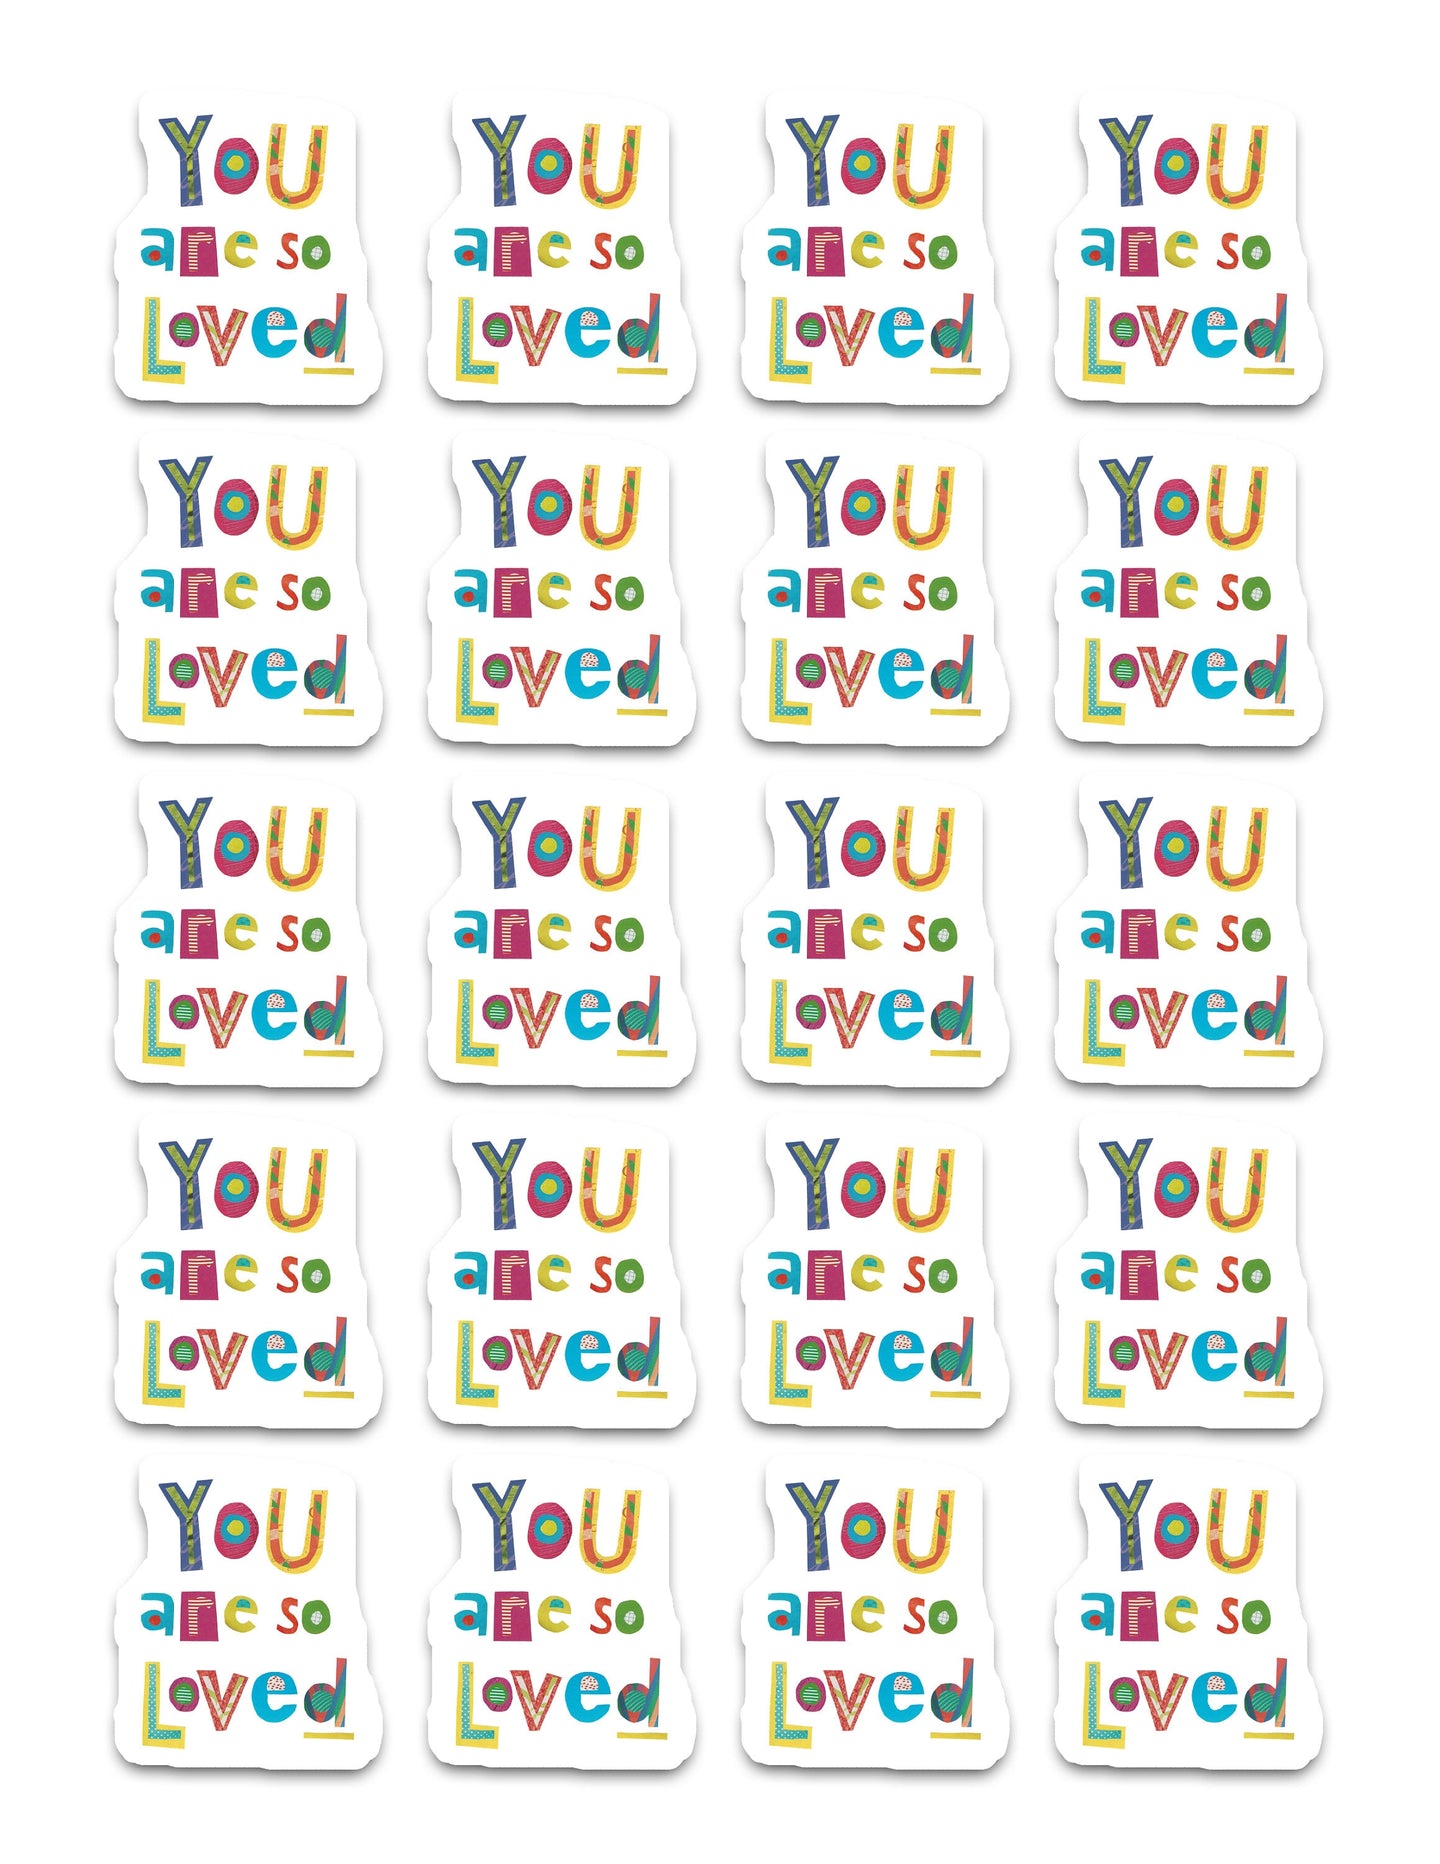 You are So Loved Collage Art Sticker Set